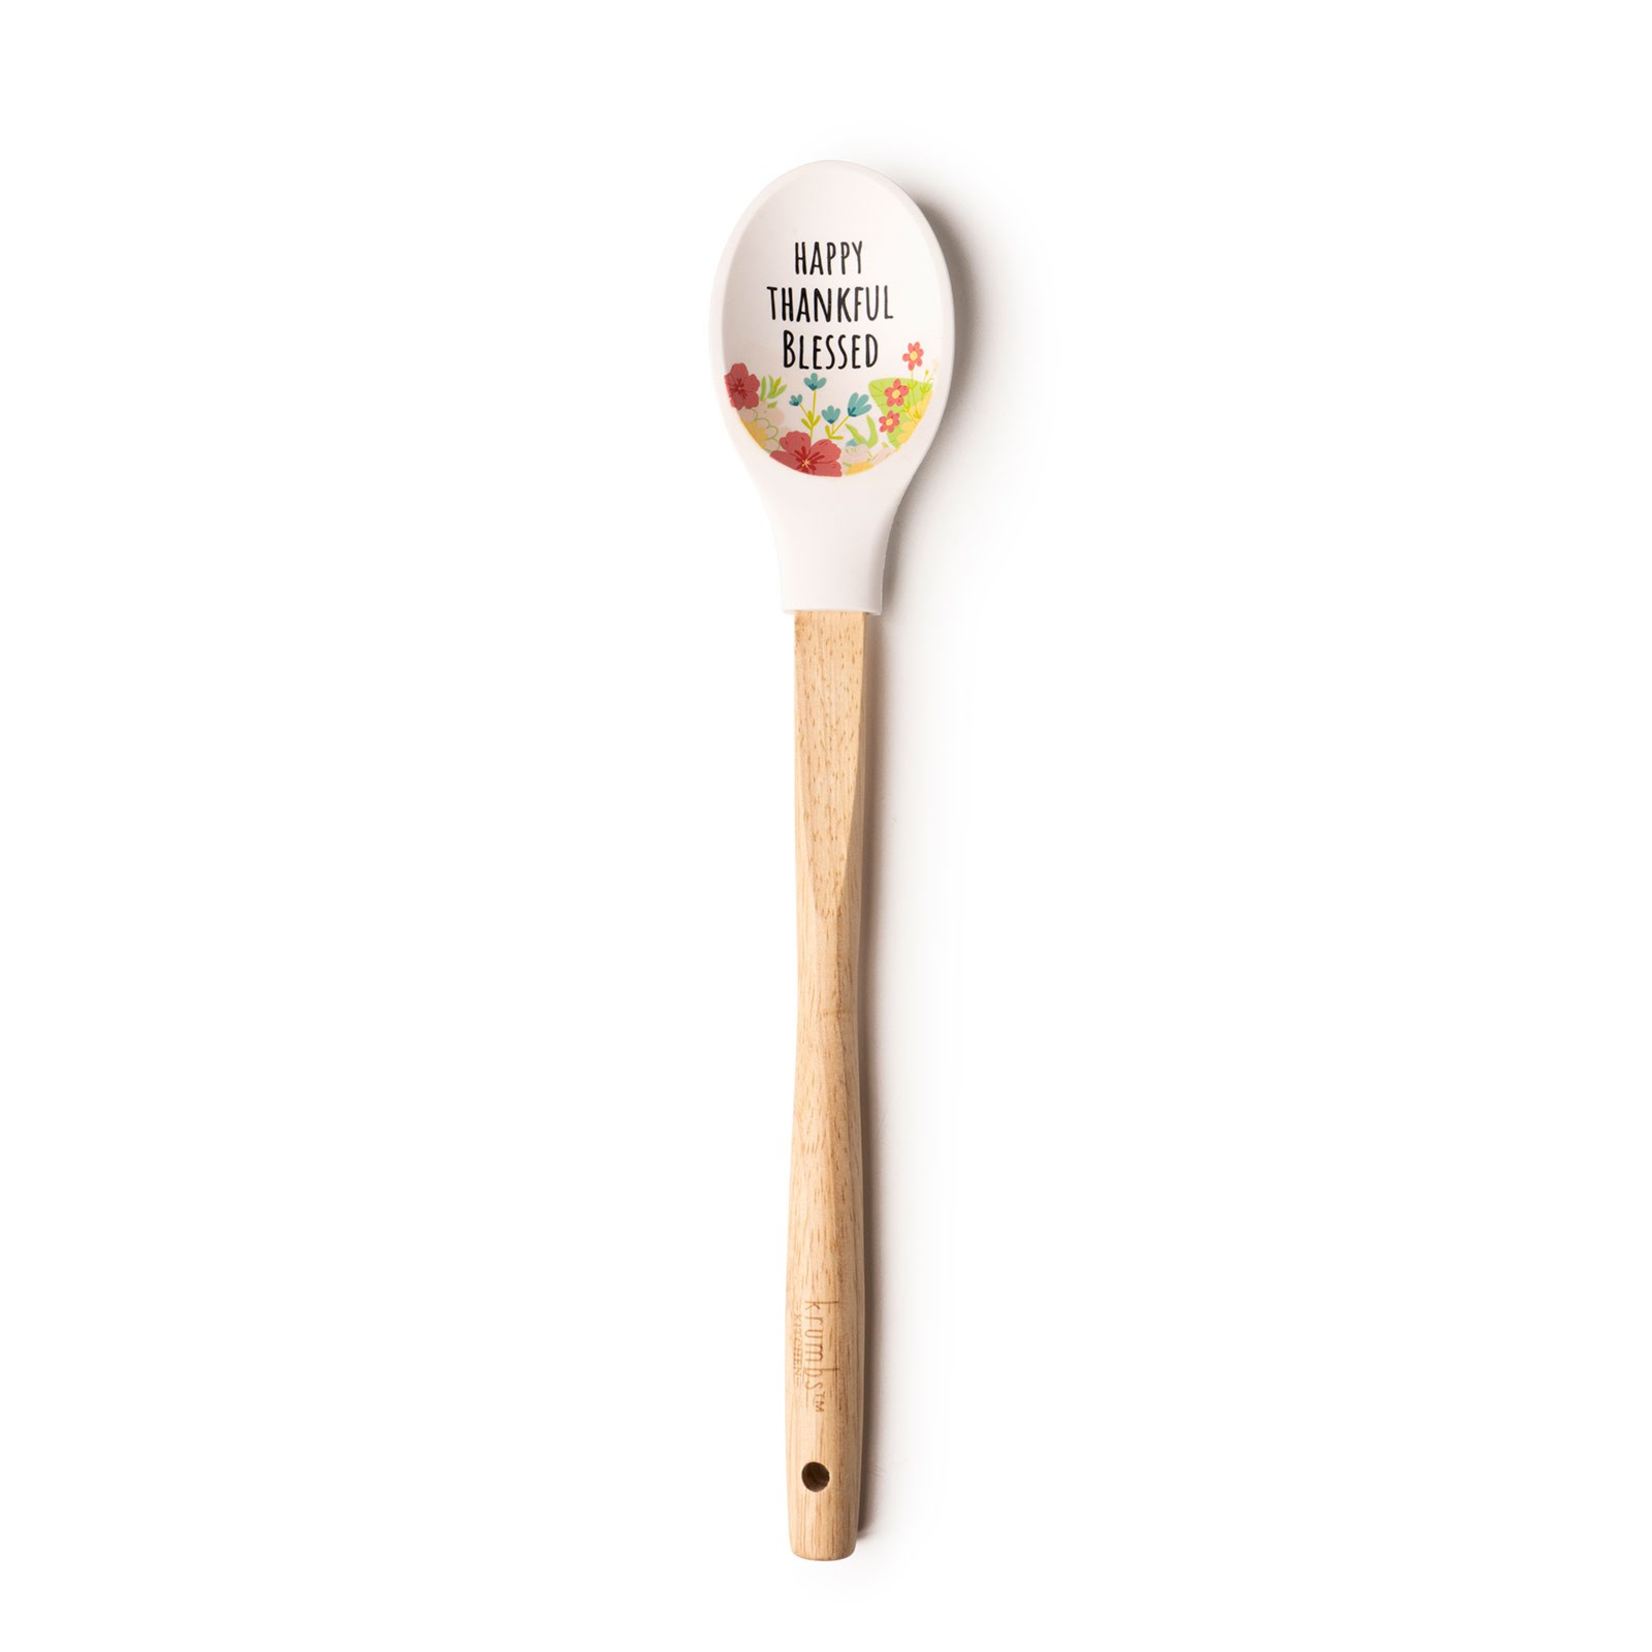 Krumbs Kitchen White Silicone Spoon Happy Thankful Blessed